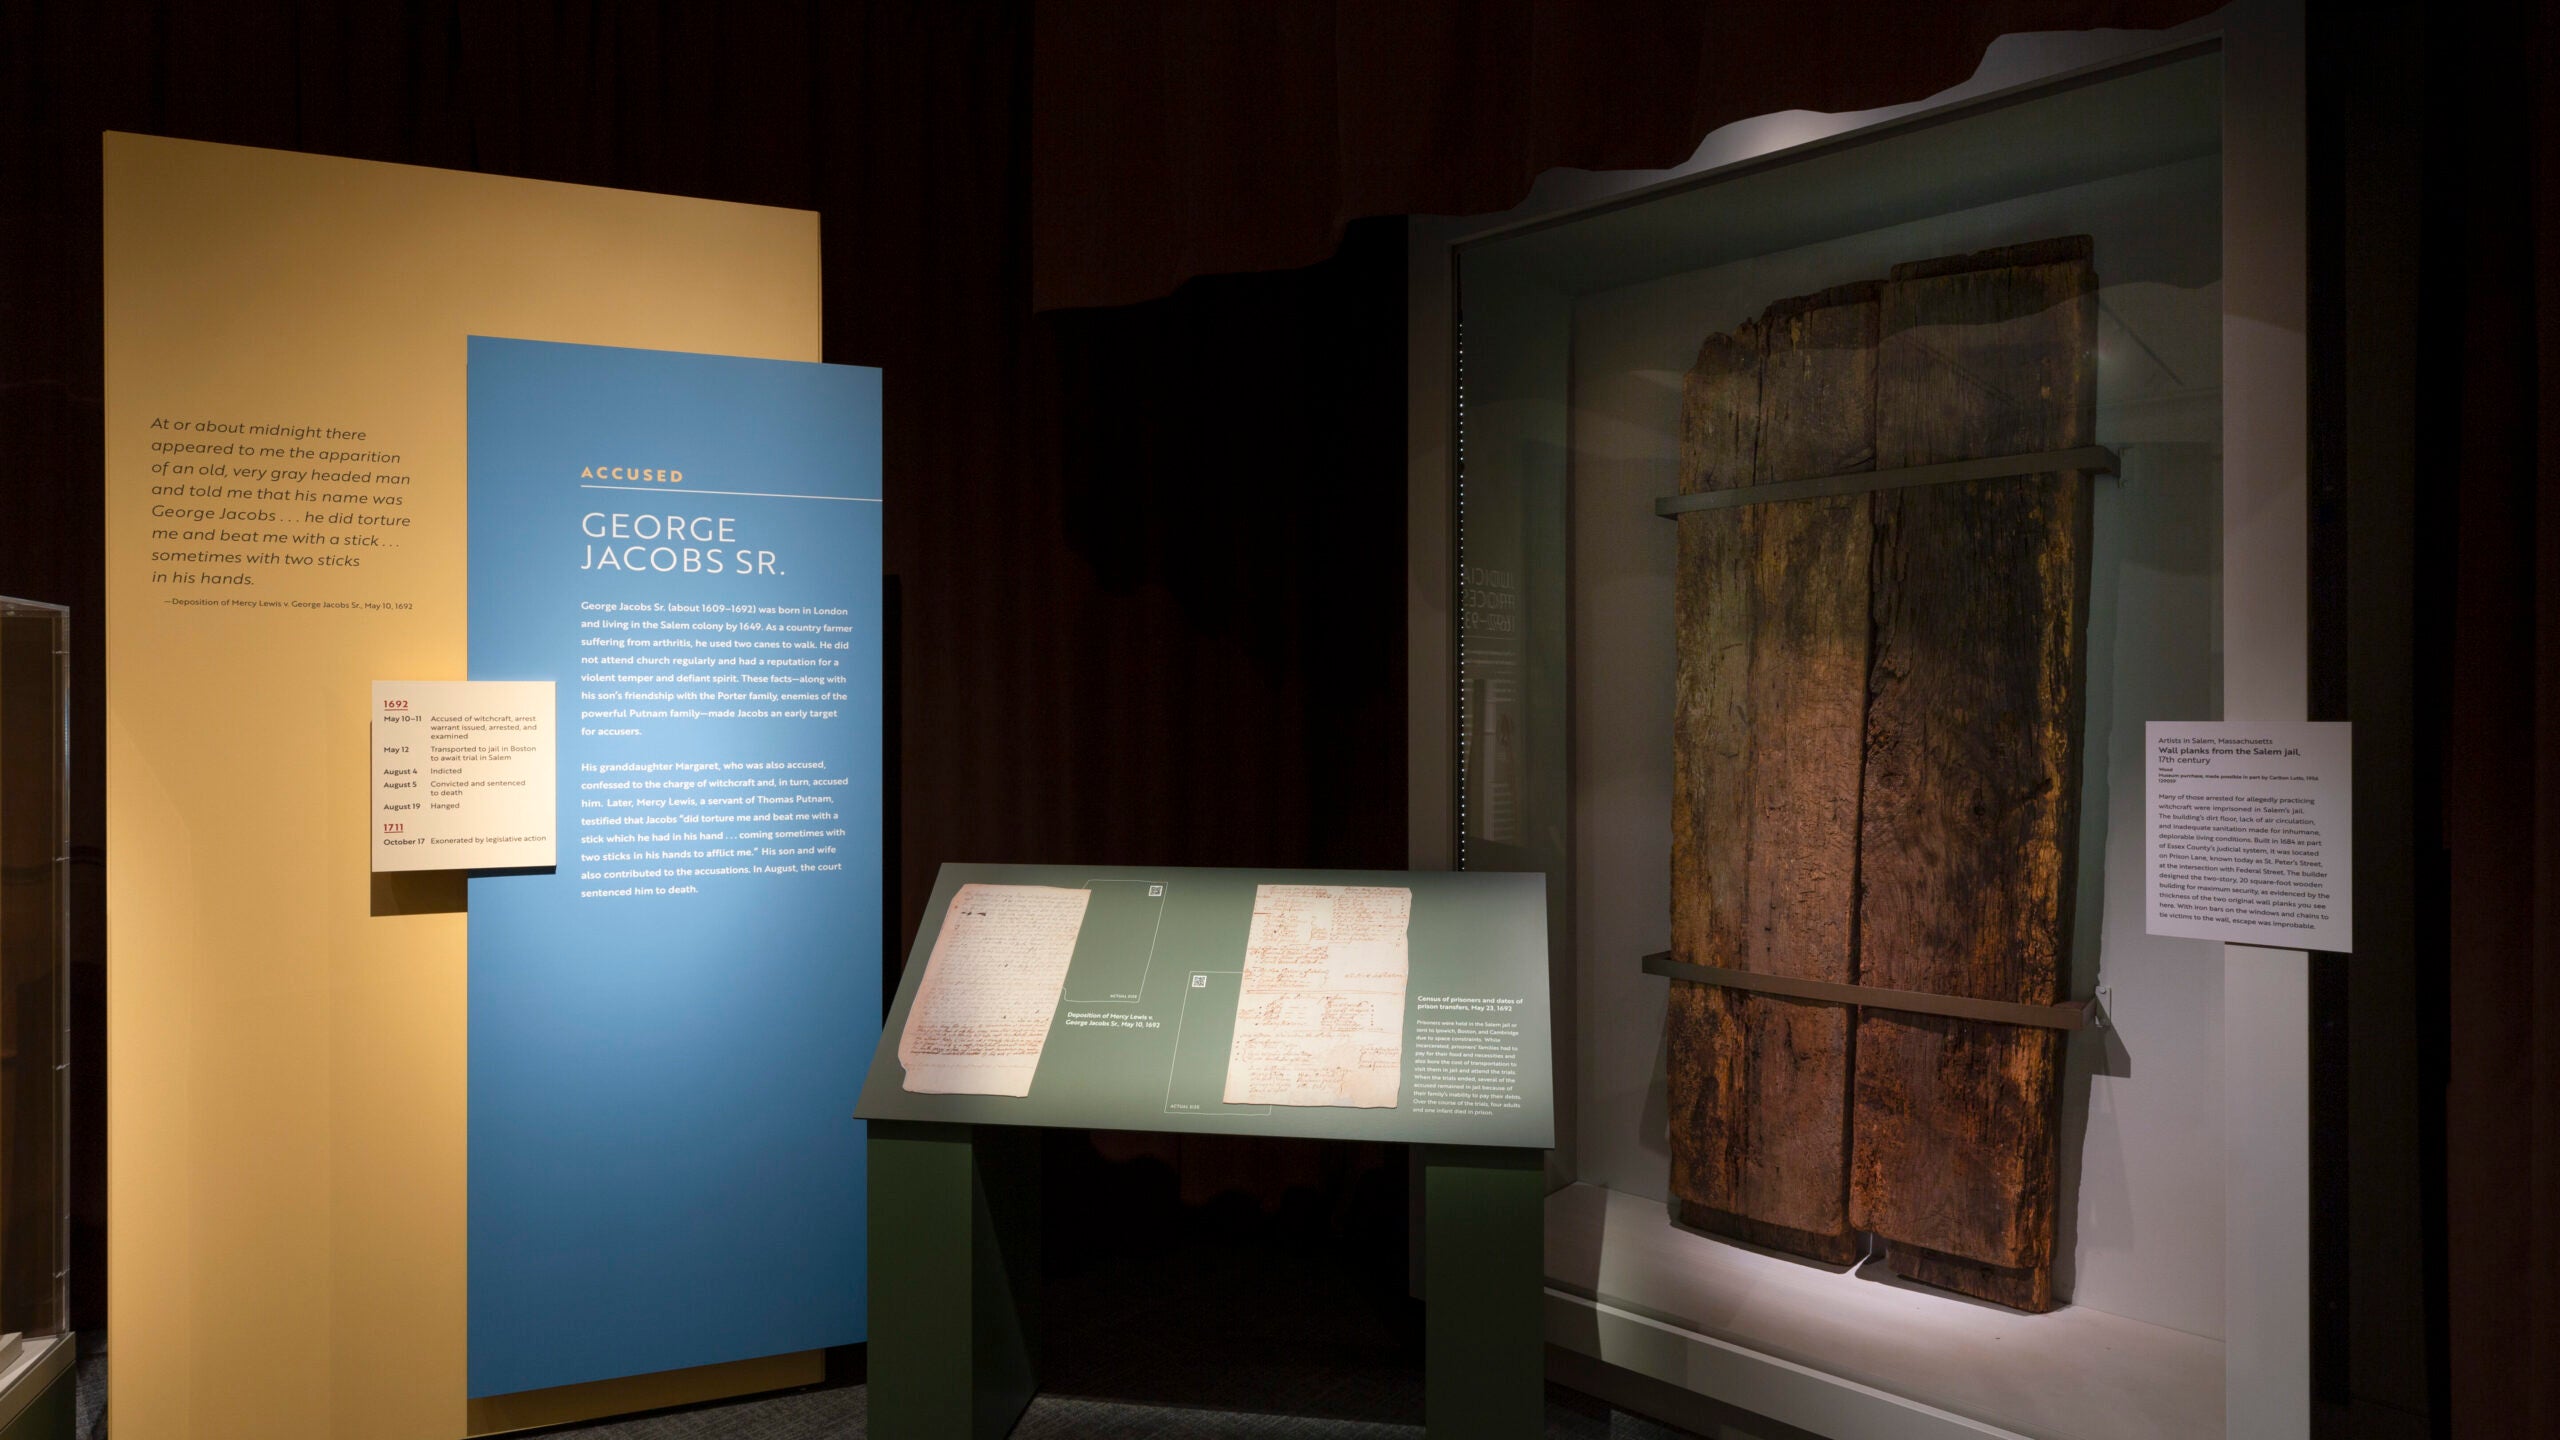 An exhibit at the Peabody Essex Museum that contains a large, wooden door with information about it on the left. 